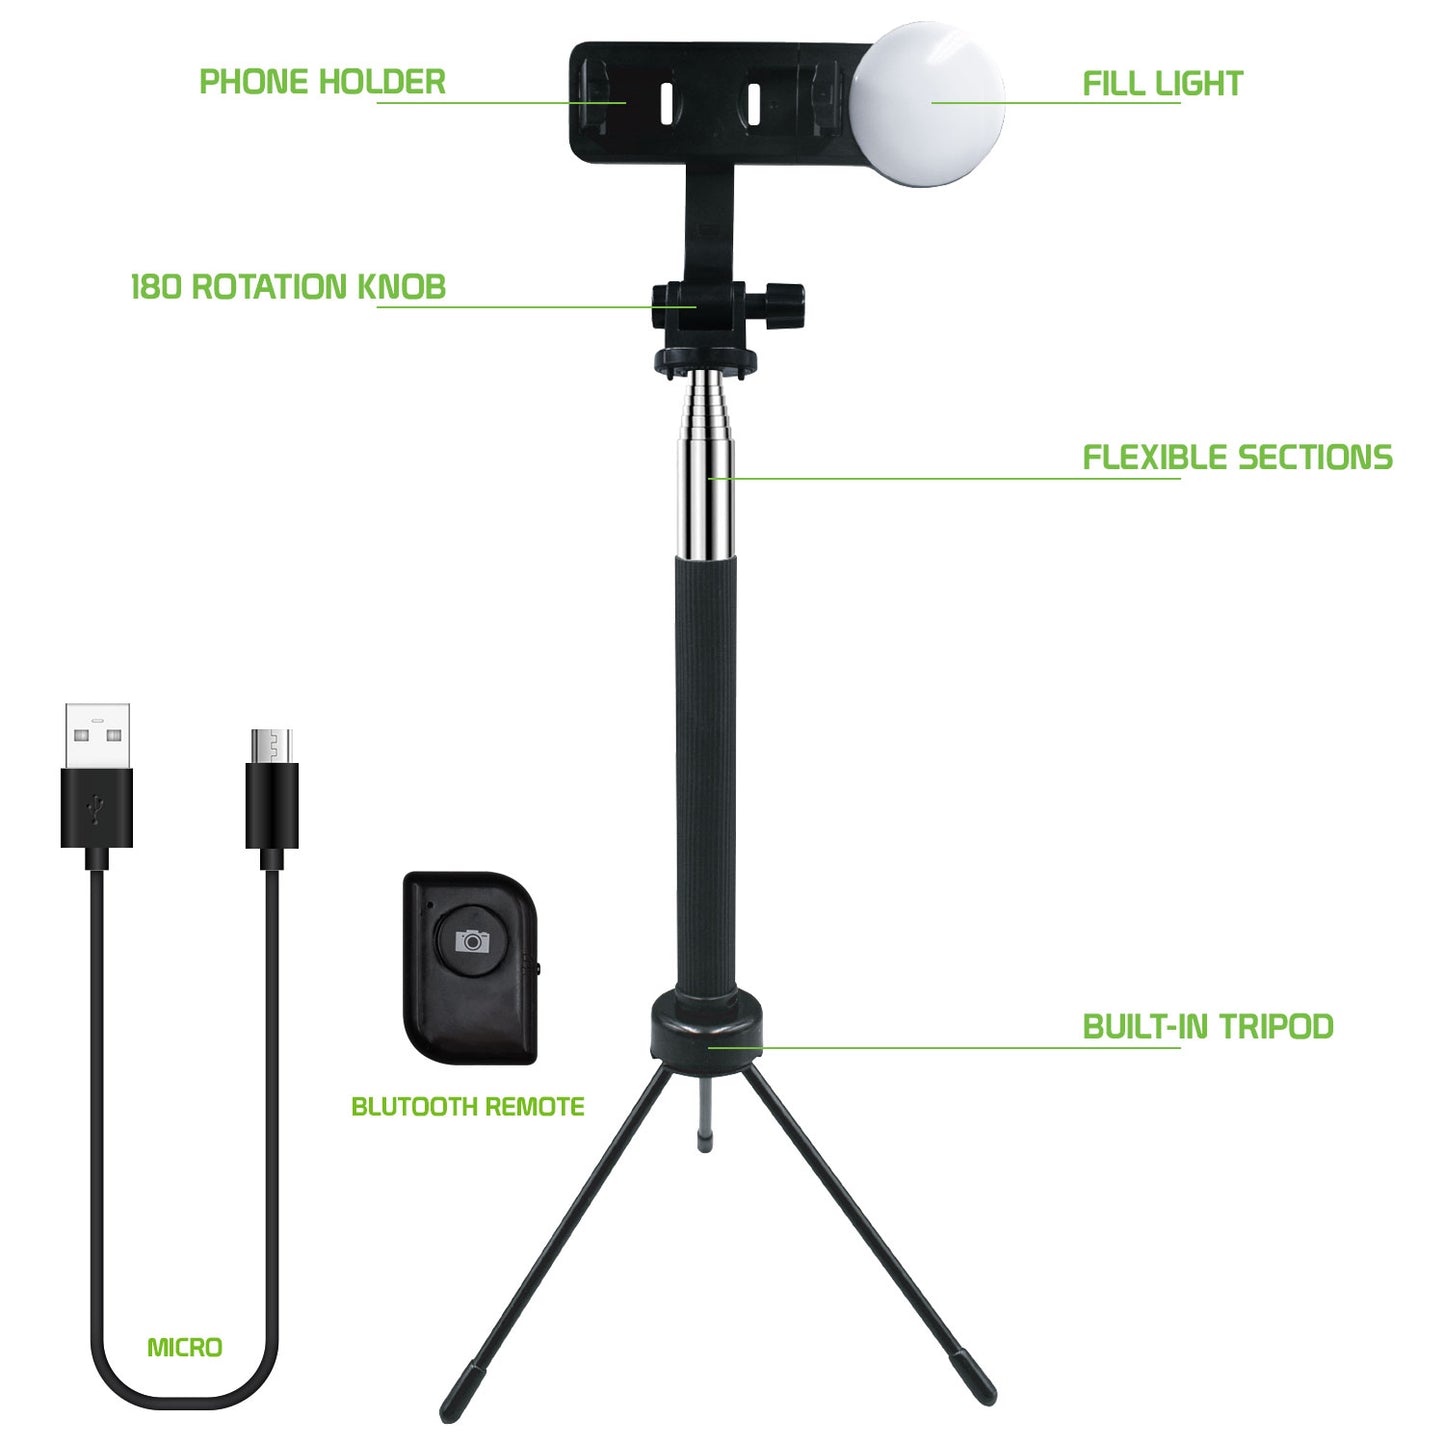 Selfie Stick with Attachable Tripod Base, 3 Adjustable Lighting Modes for Live Streams, Videos and Photos Compatible to iPhones and Androids